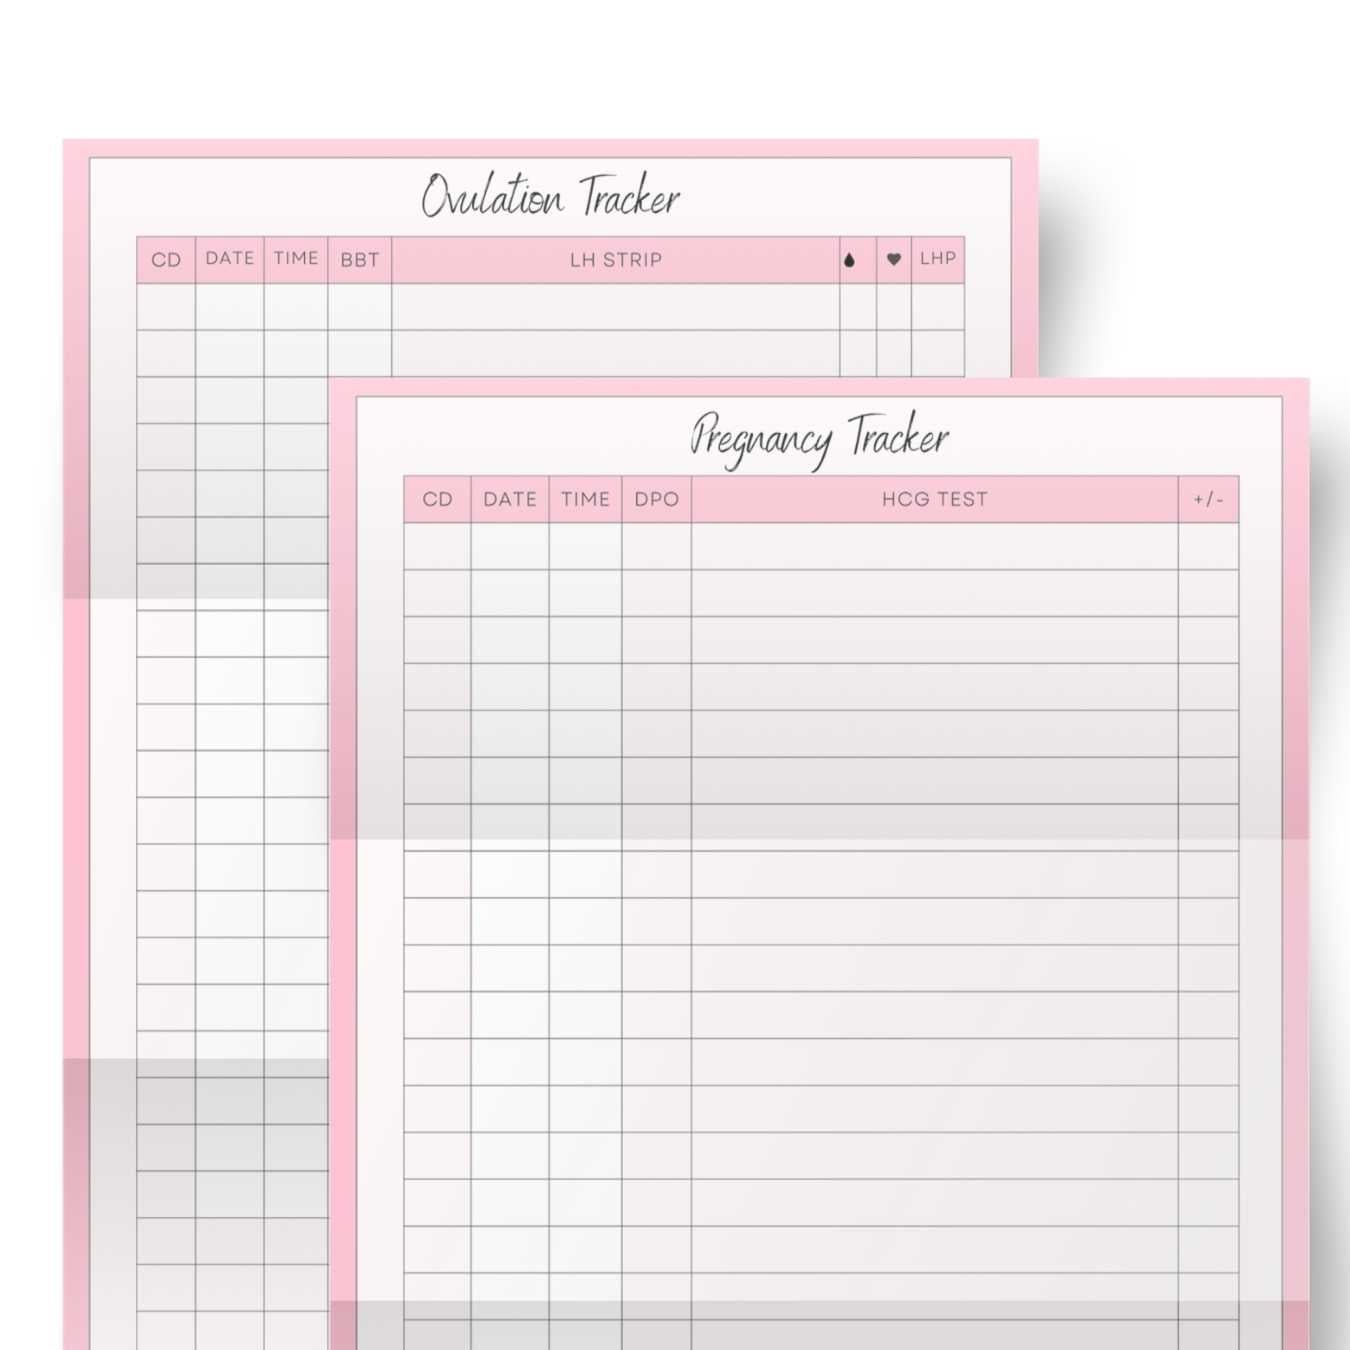 A comprehensive fertility tracking chart for tracking menstrual cycle, ovulation window, basal body temperature, LH strip results, sexual activity or insemination days, and pregnancy progress including HCG levels and placement to stick LH and HCG strip tests